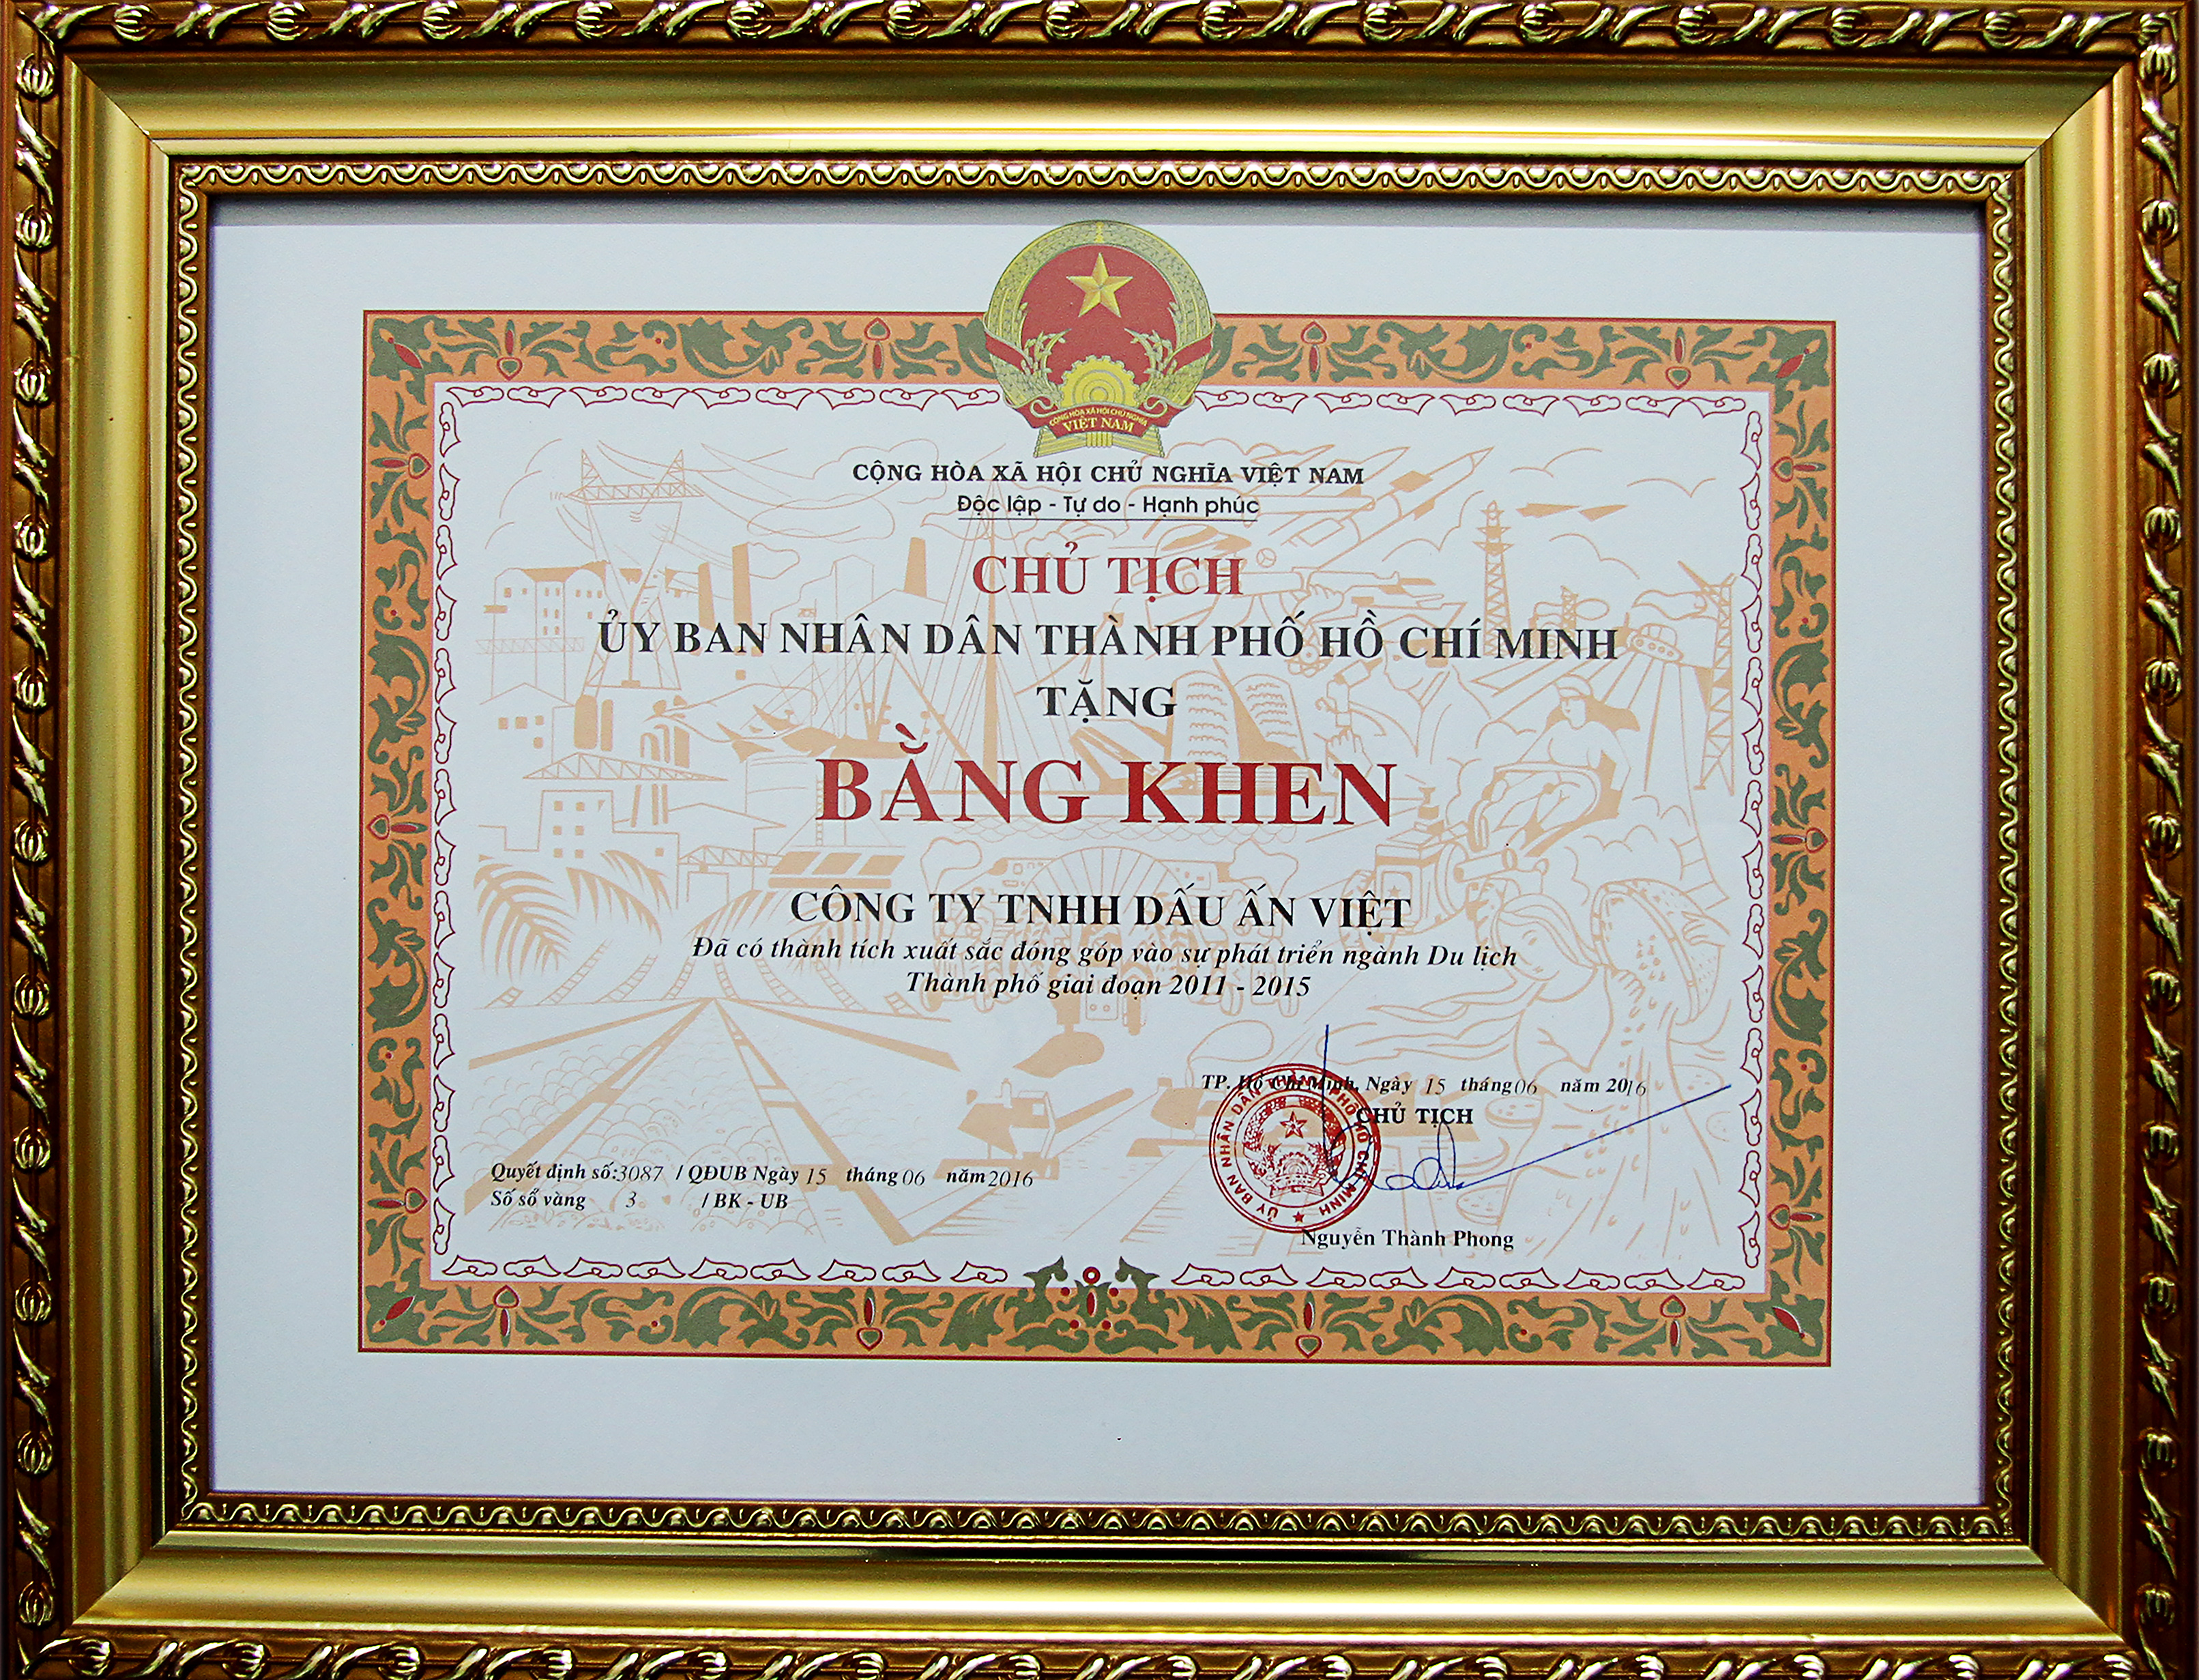 Vietmark Travel Co.,LTD was honored received an award from the Chairman of HCMC People's Committee